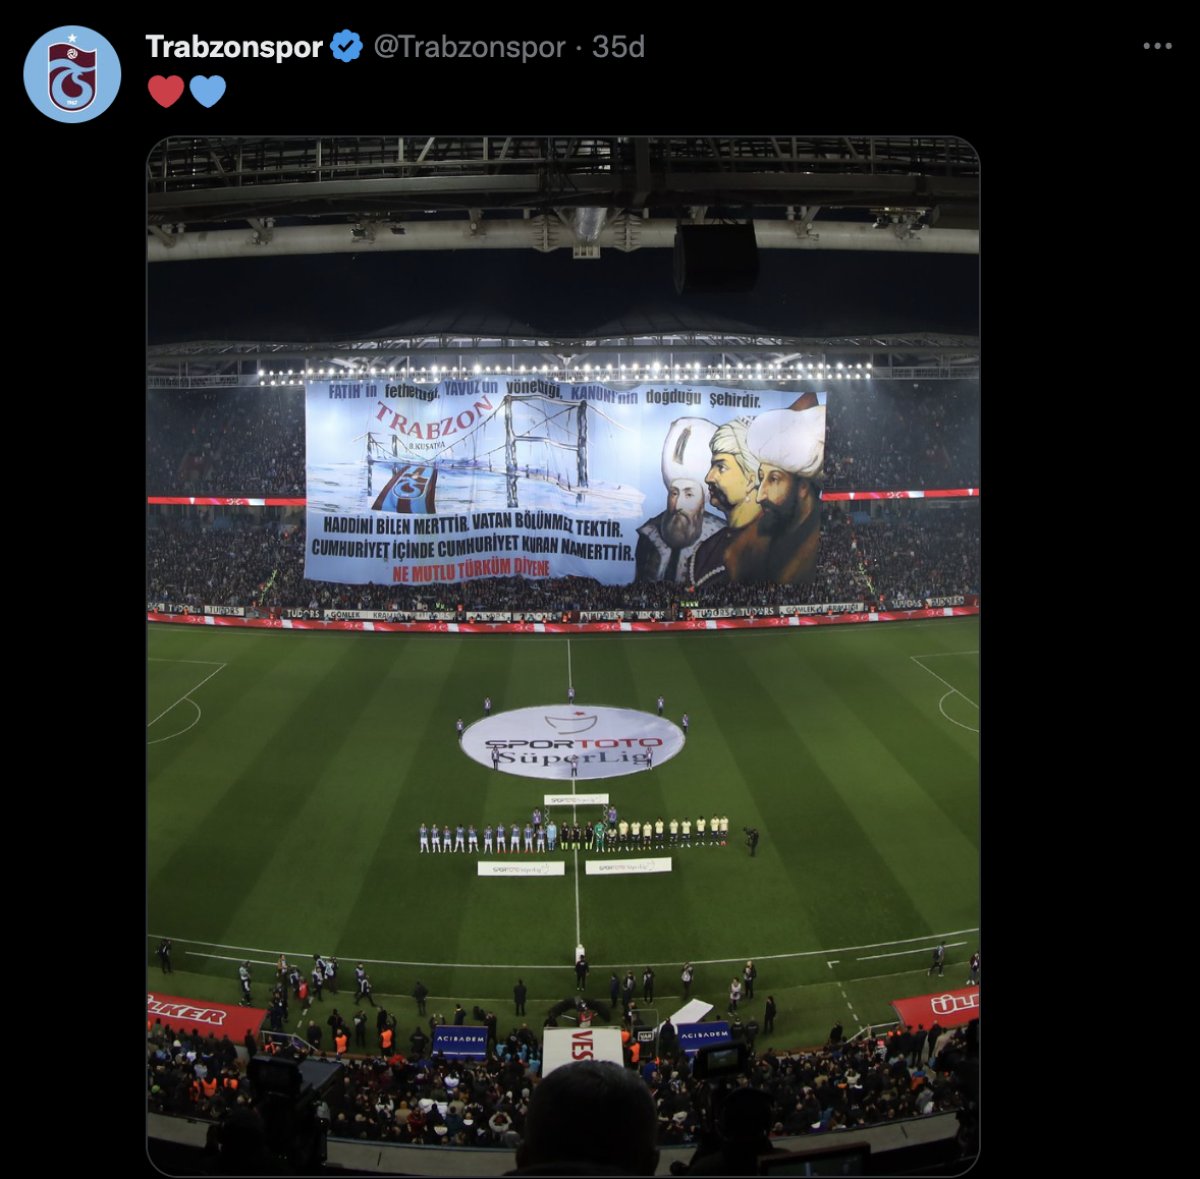 Significant banner from Trabzonspor #4